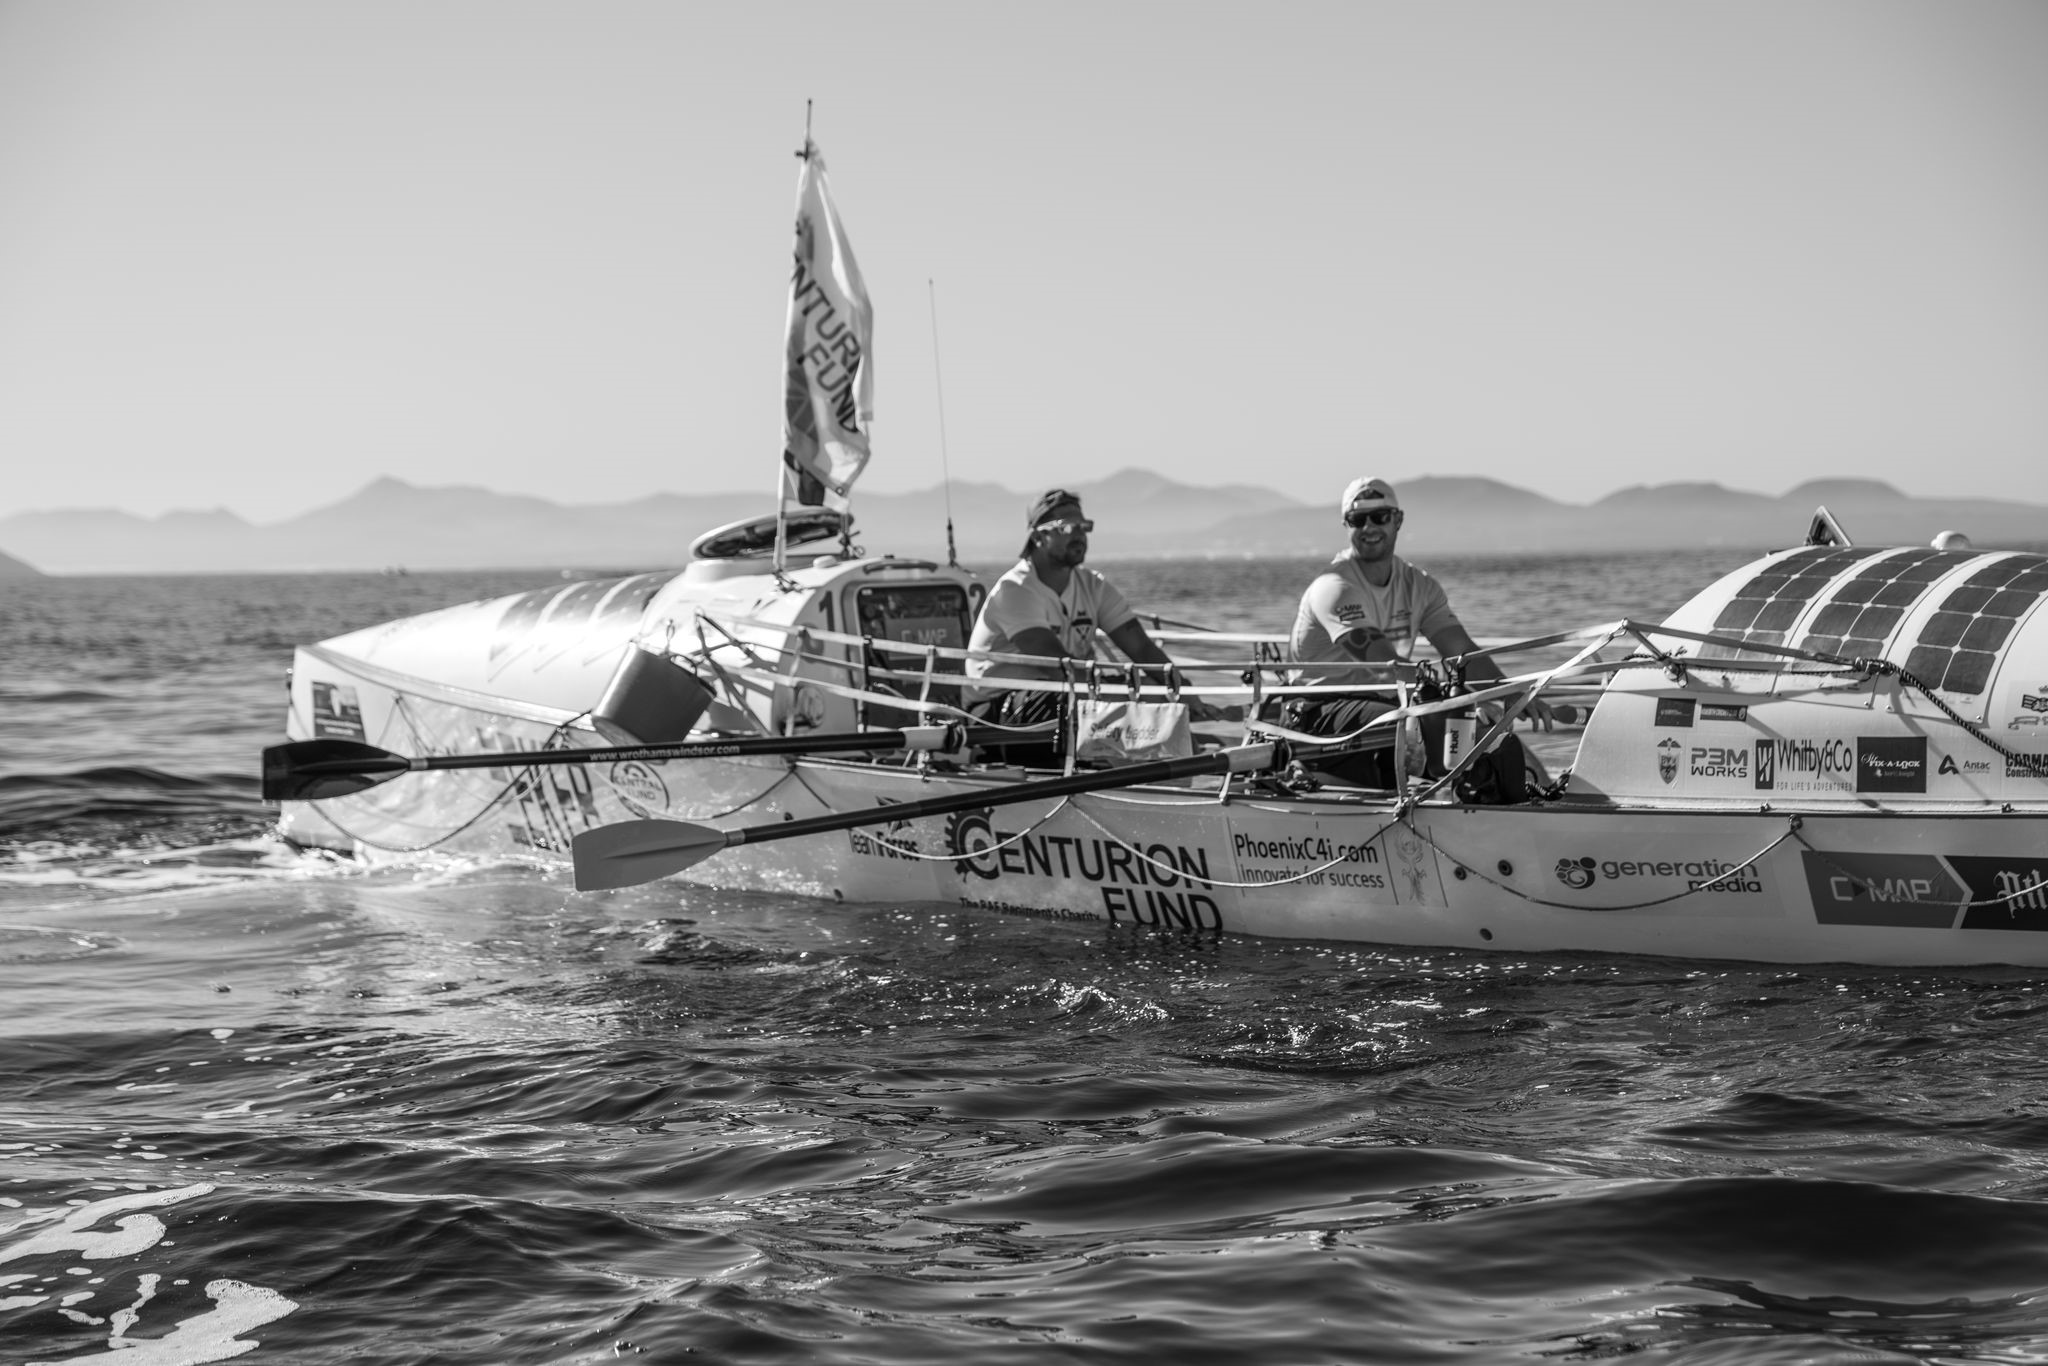 Black and white photo of the crew on the boat in the ocean.